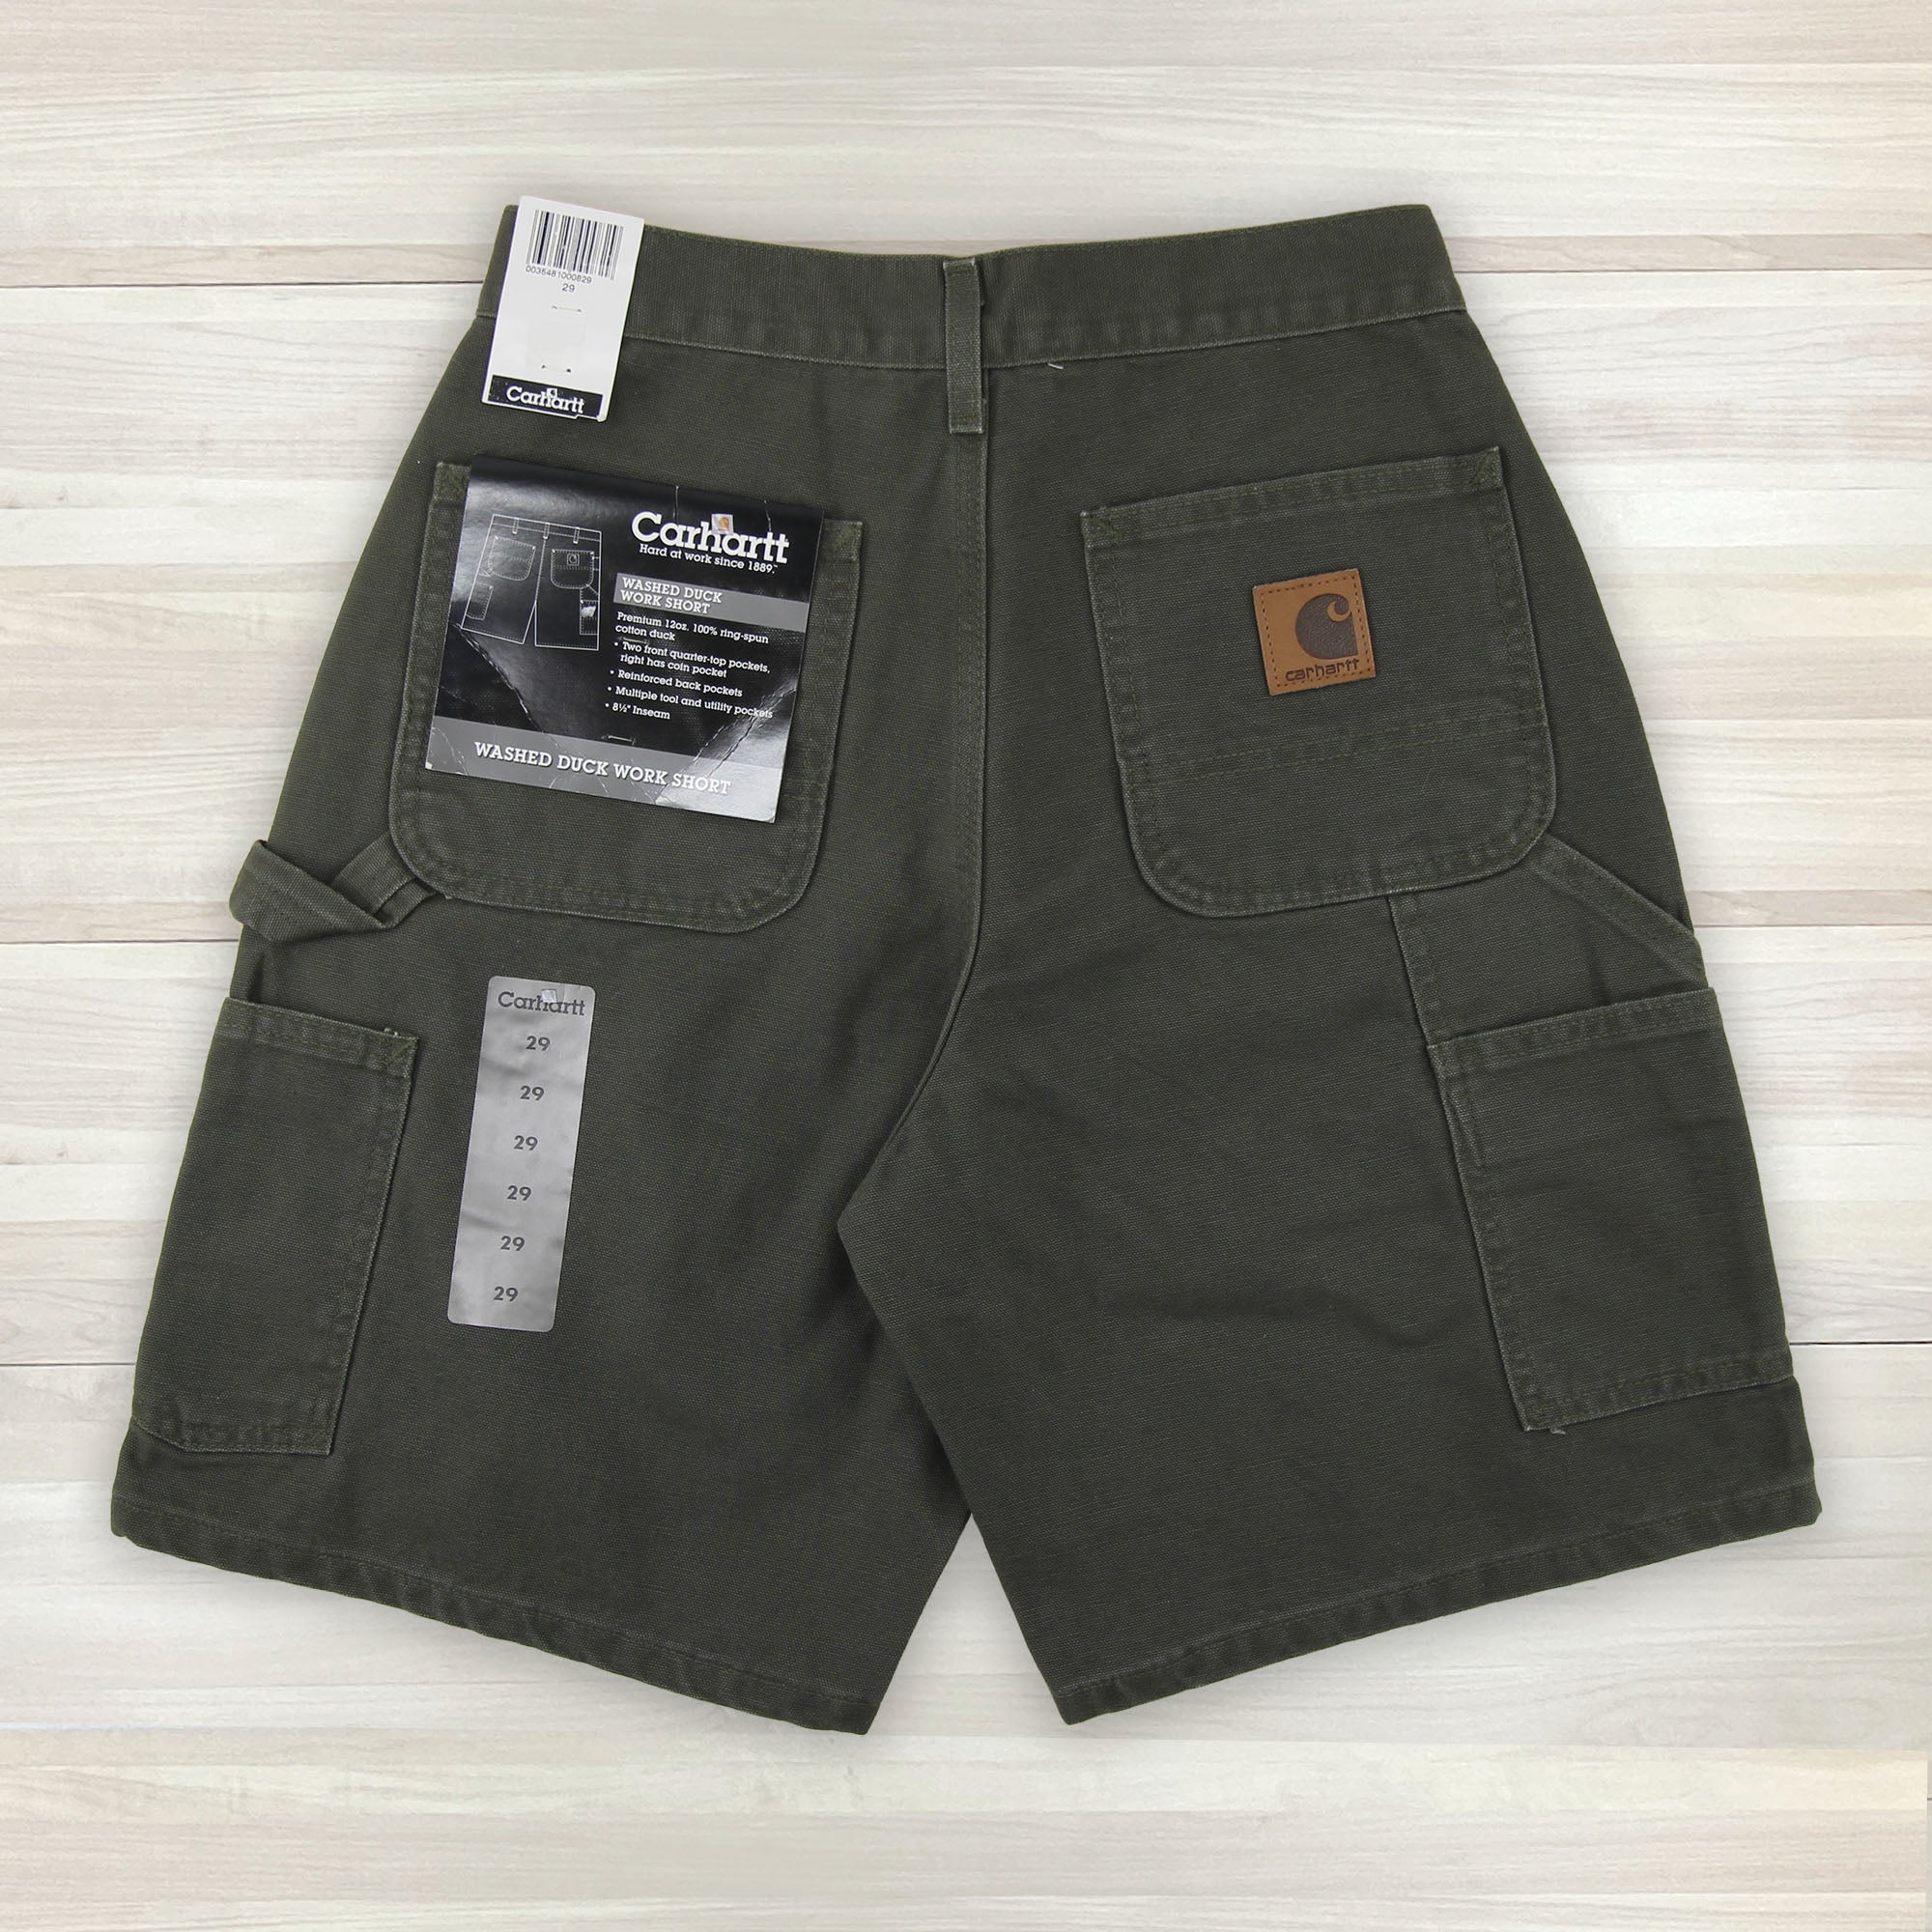 Men's Vintage Carhartt B25 Moss Washed Duck Shorts NWT 29x8.5 - 0